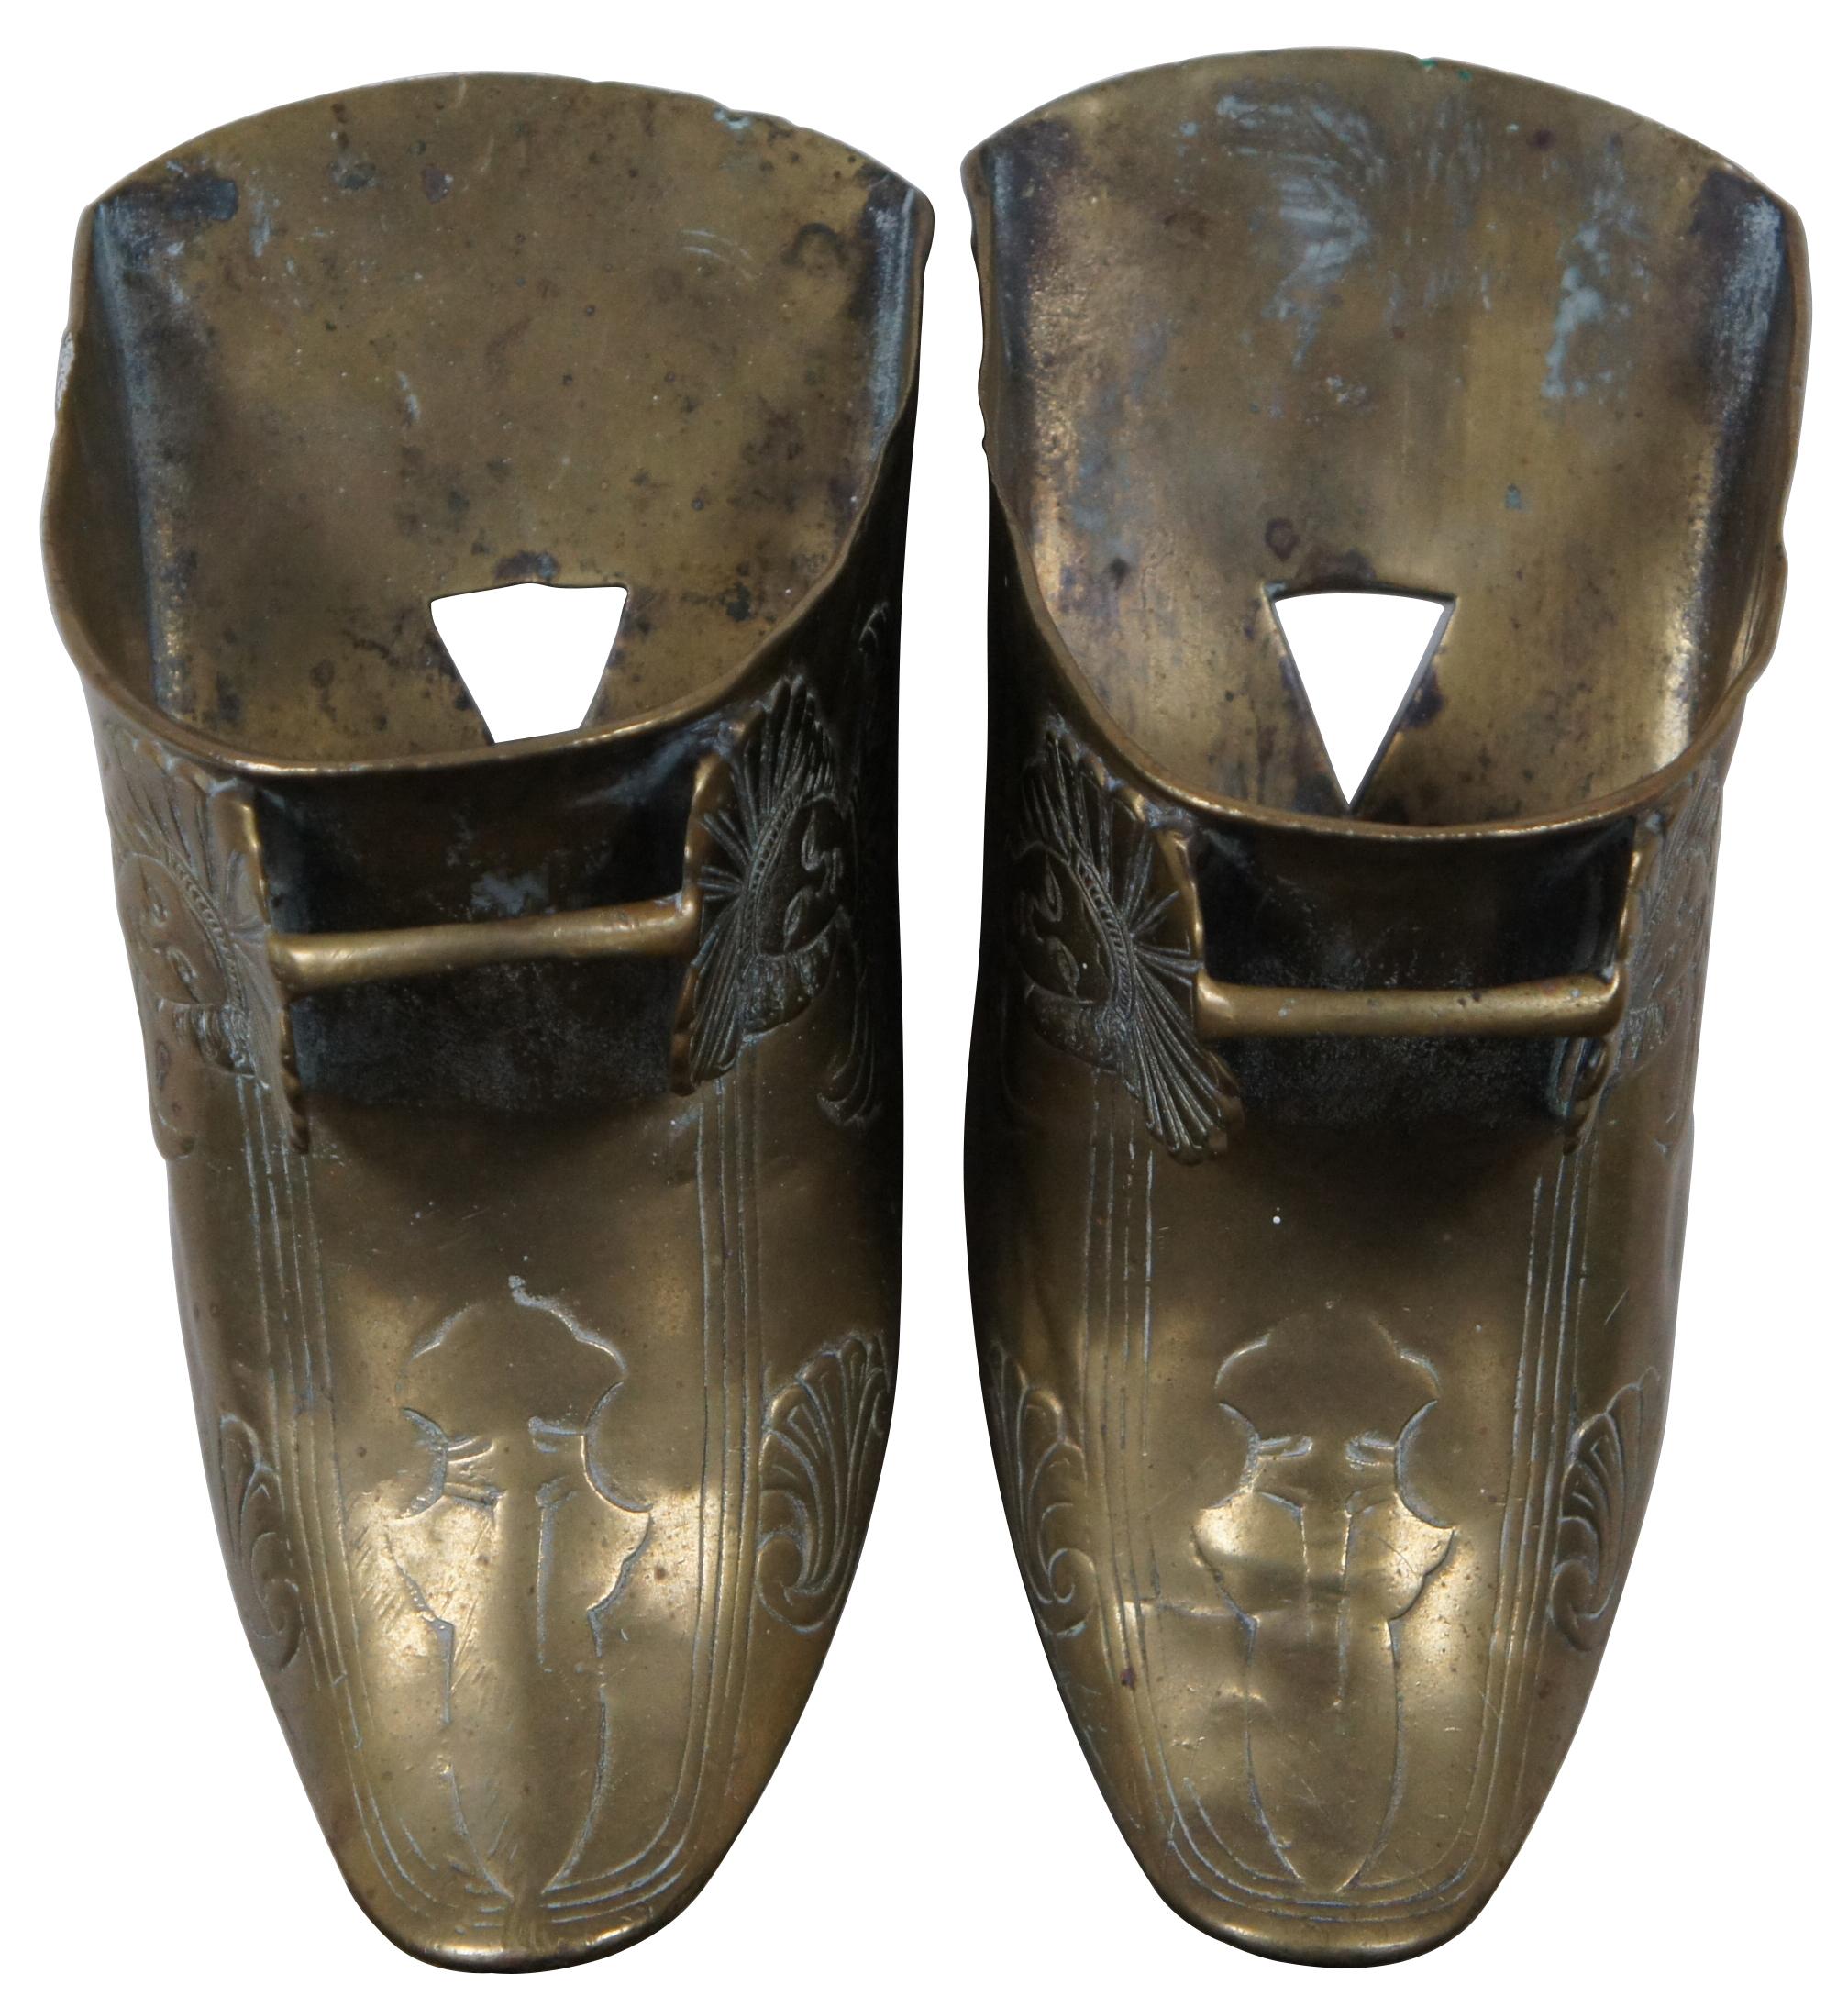 Pair of antique brass horse stirrups in the style of the Spanish Conquistadors, decorated with a European re-imagining of an Aztec or Mayan figure in a feathered robe and headdress.
       